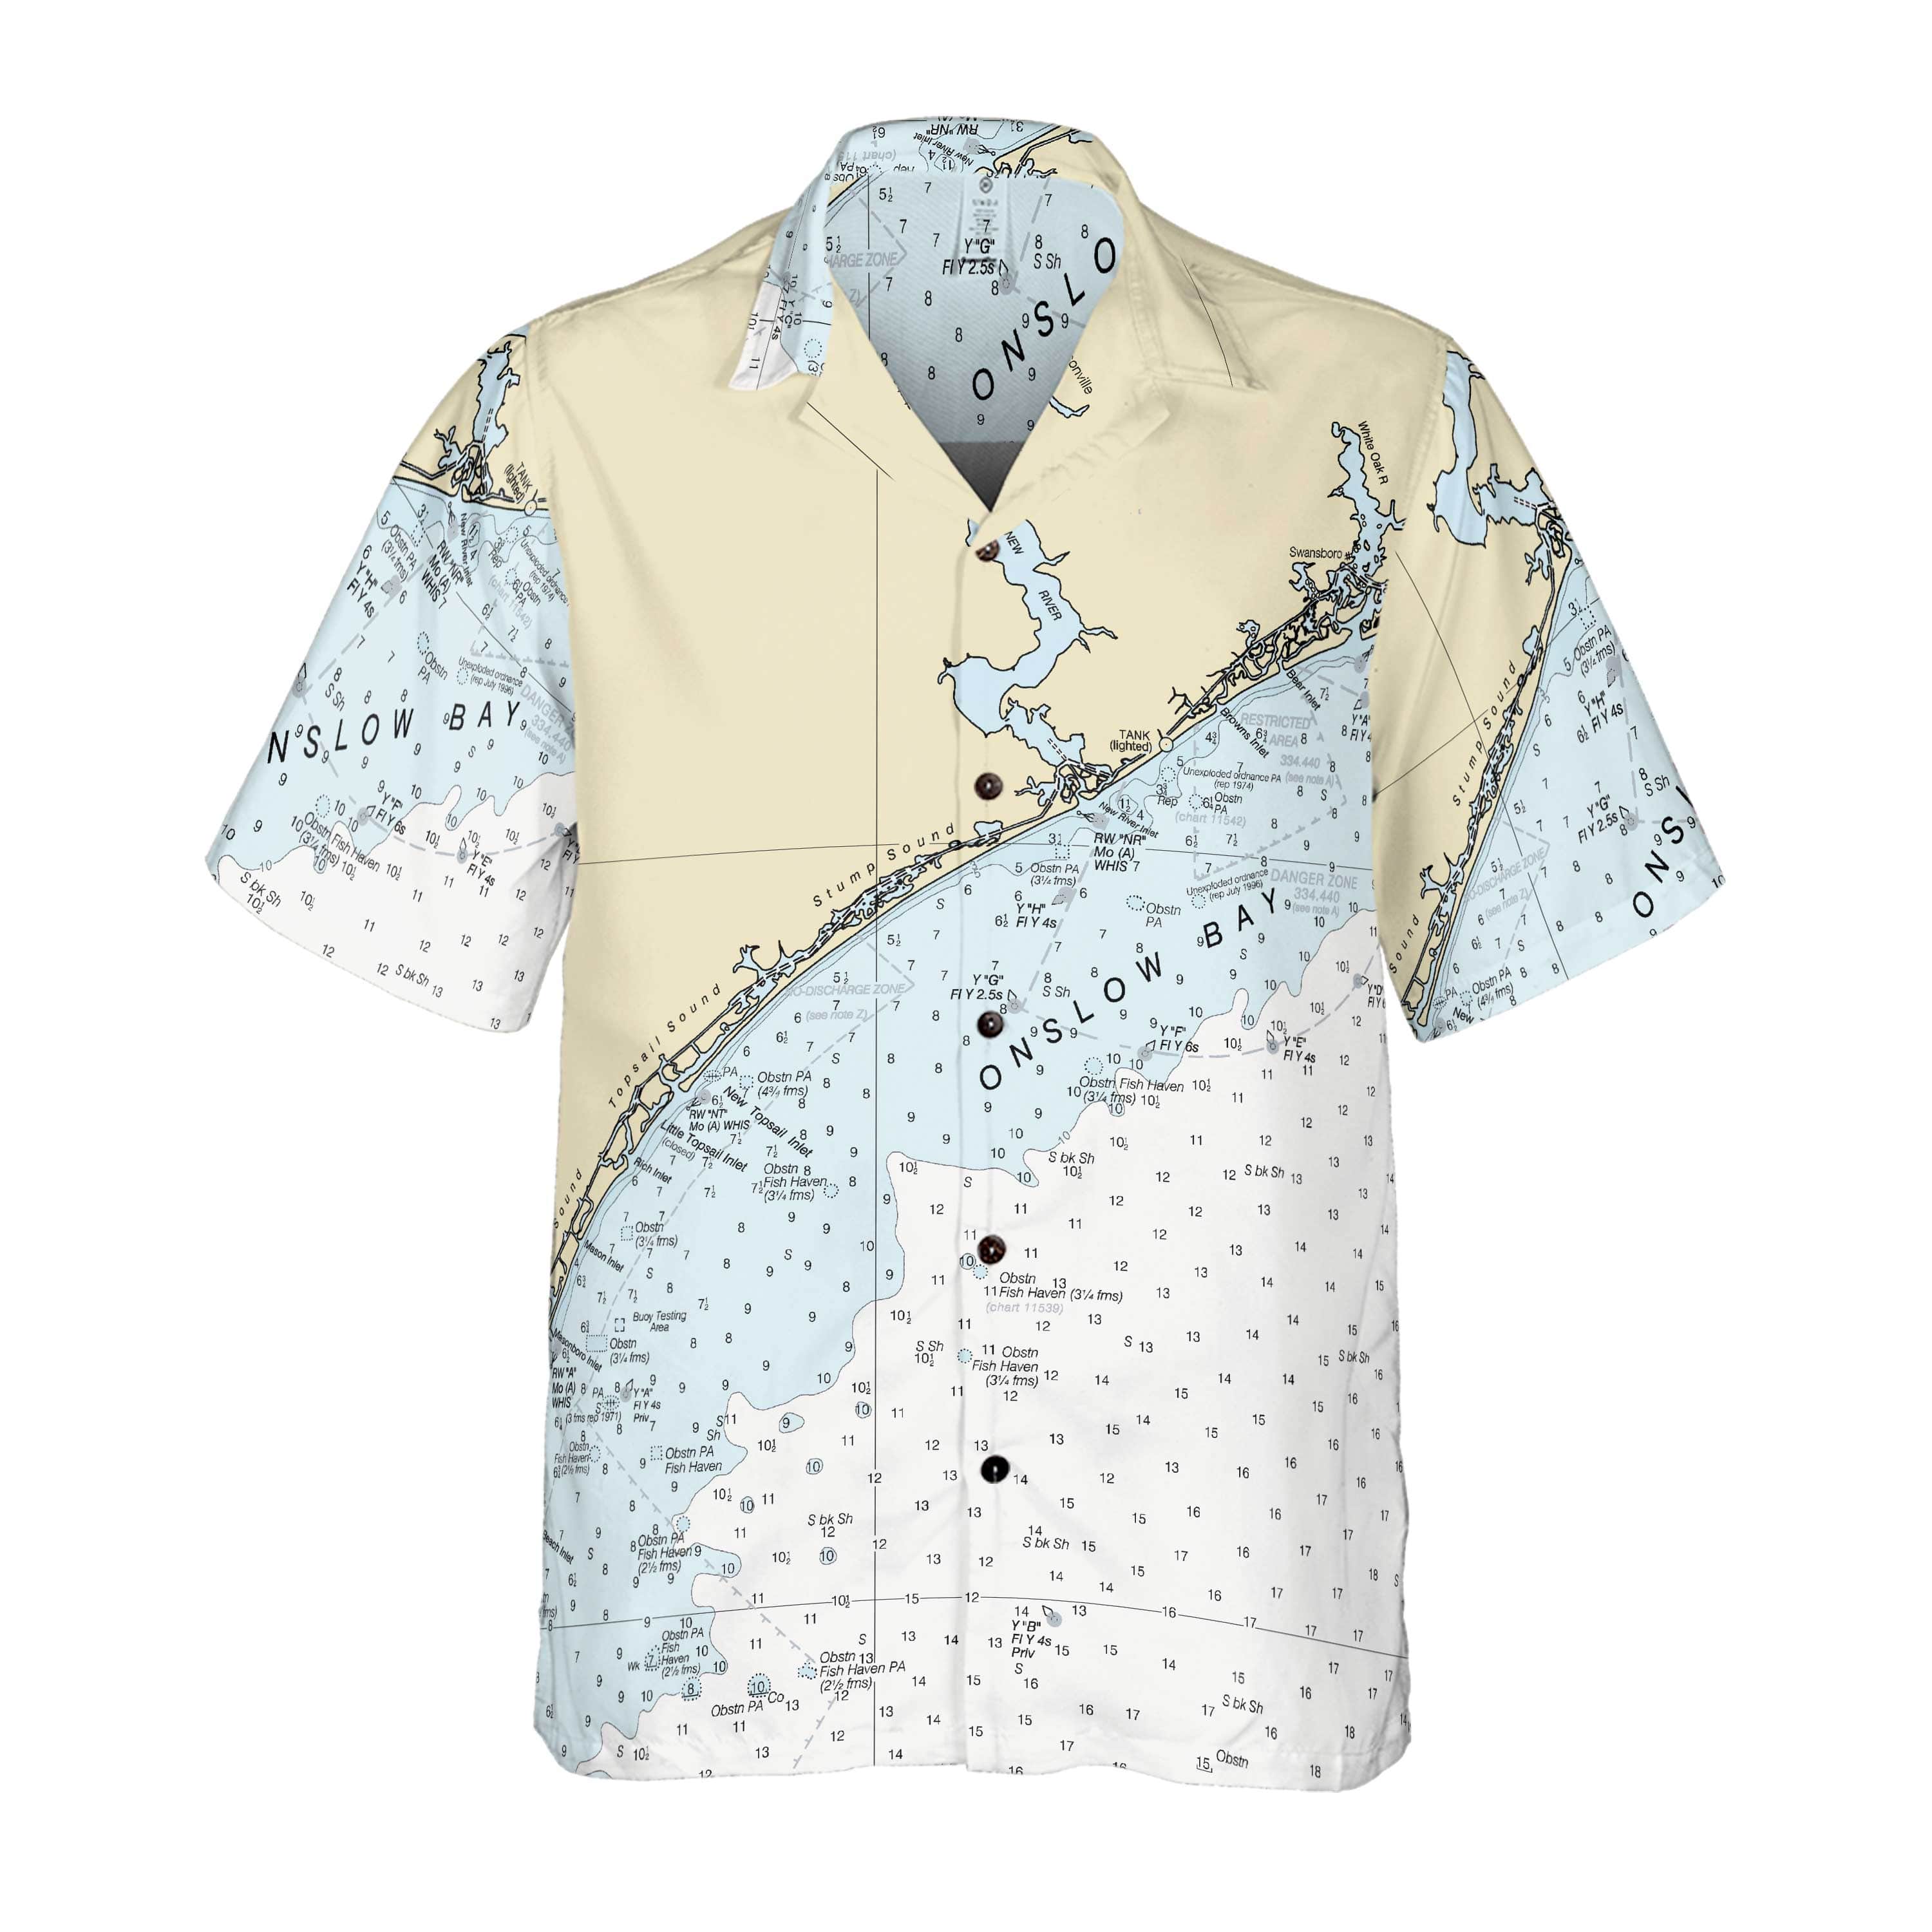 The Onslow Bay Coconut Button Camp Shirt